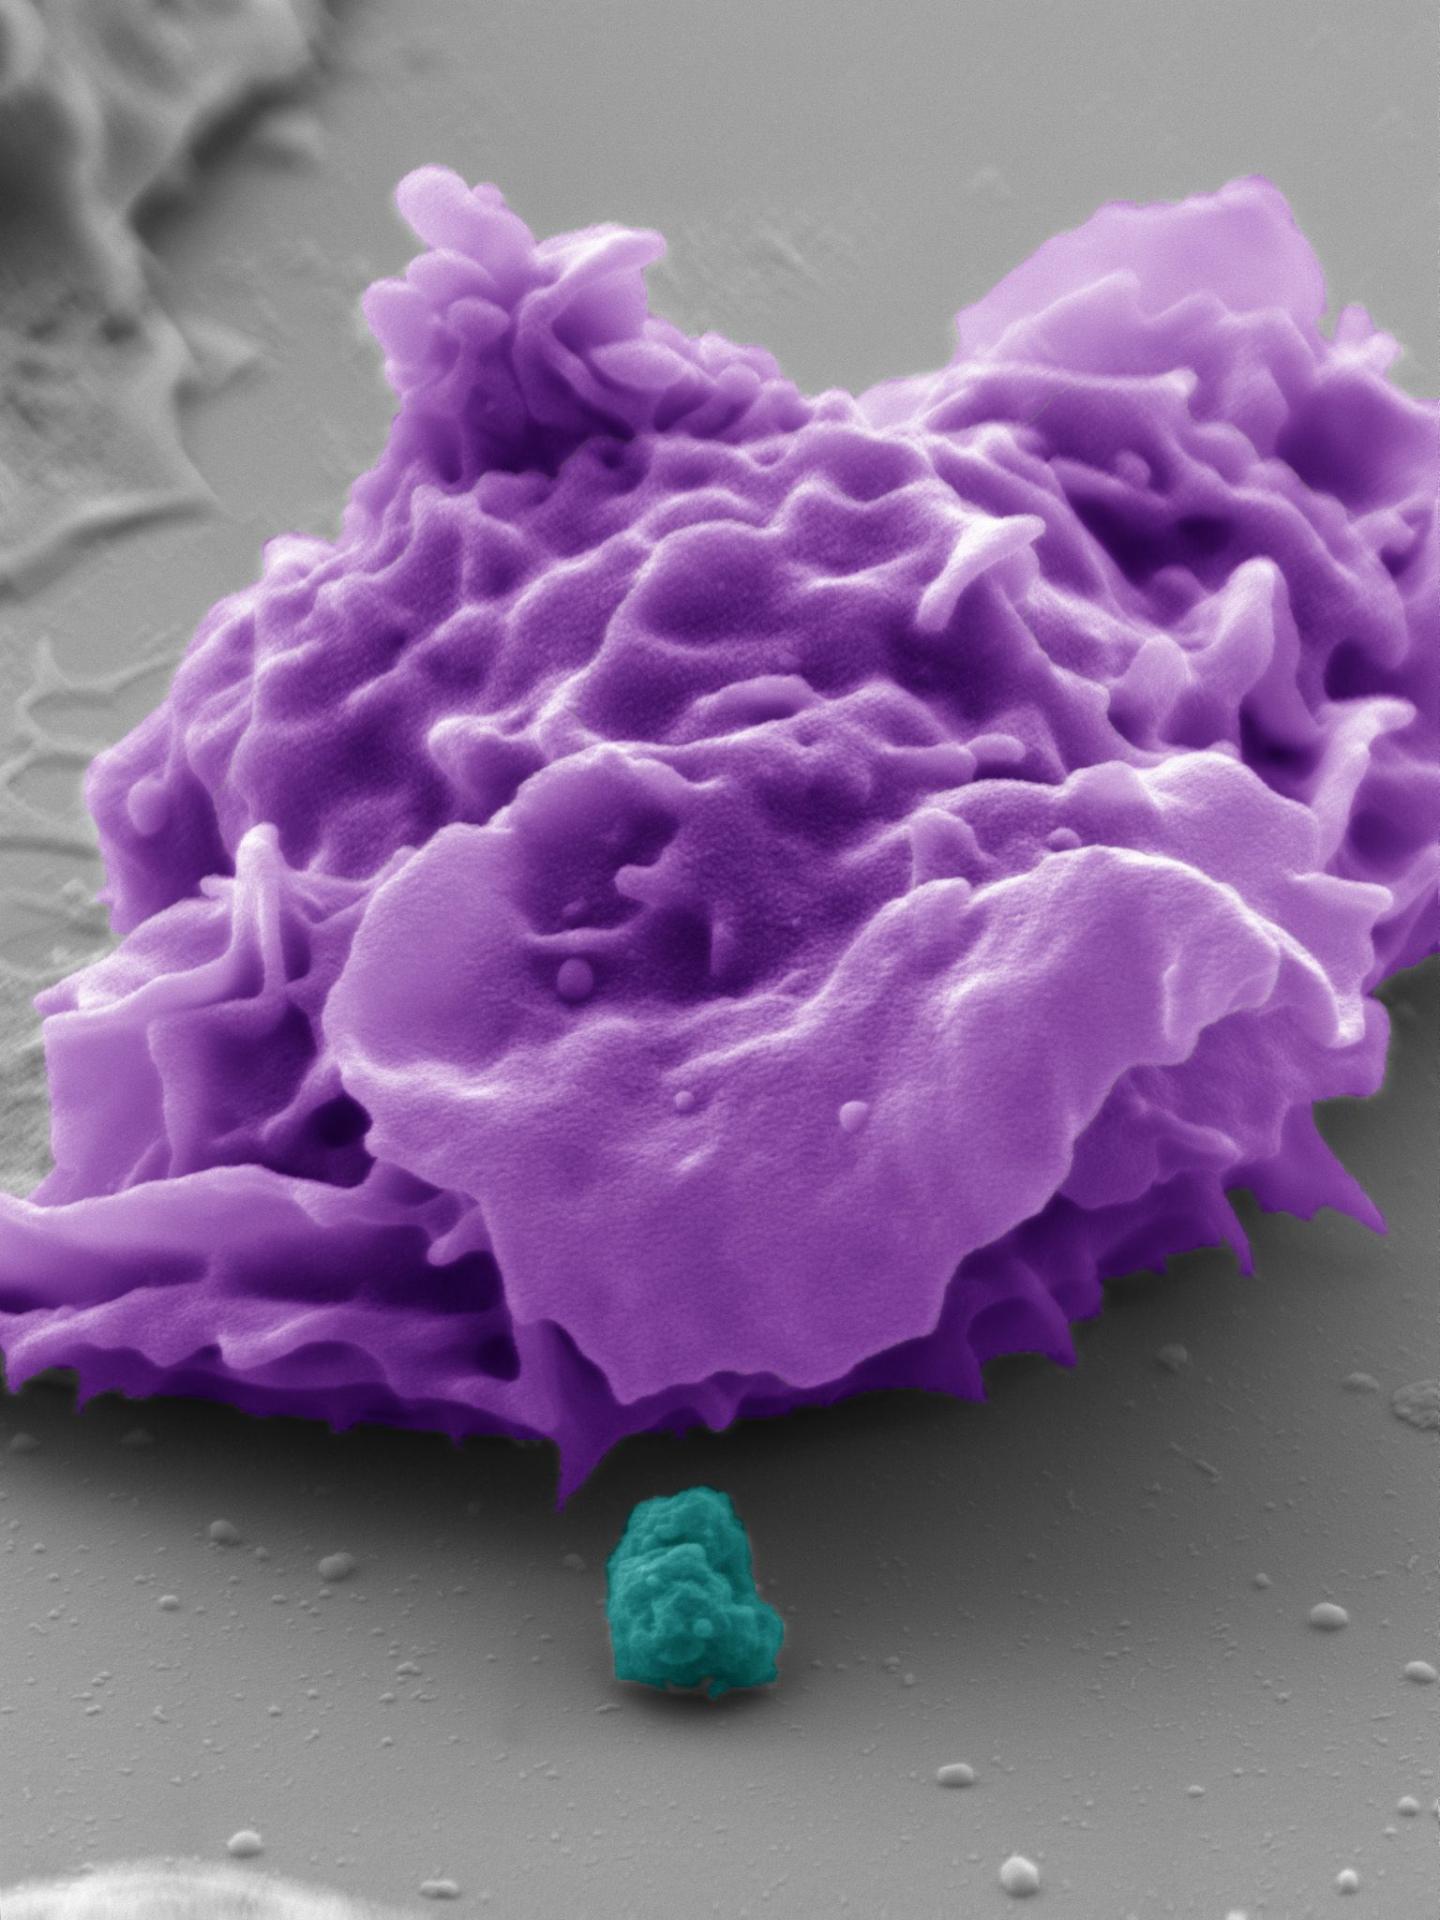 The Pseudocolored Electron Microscope Image